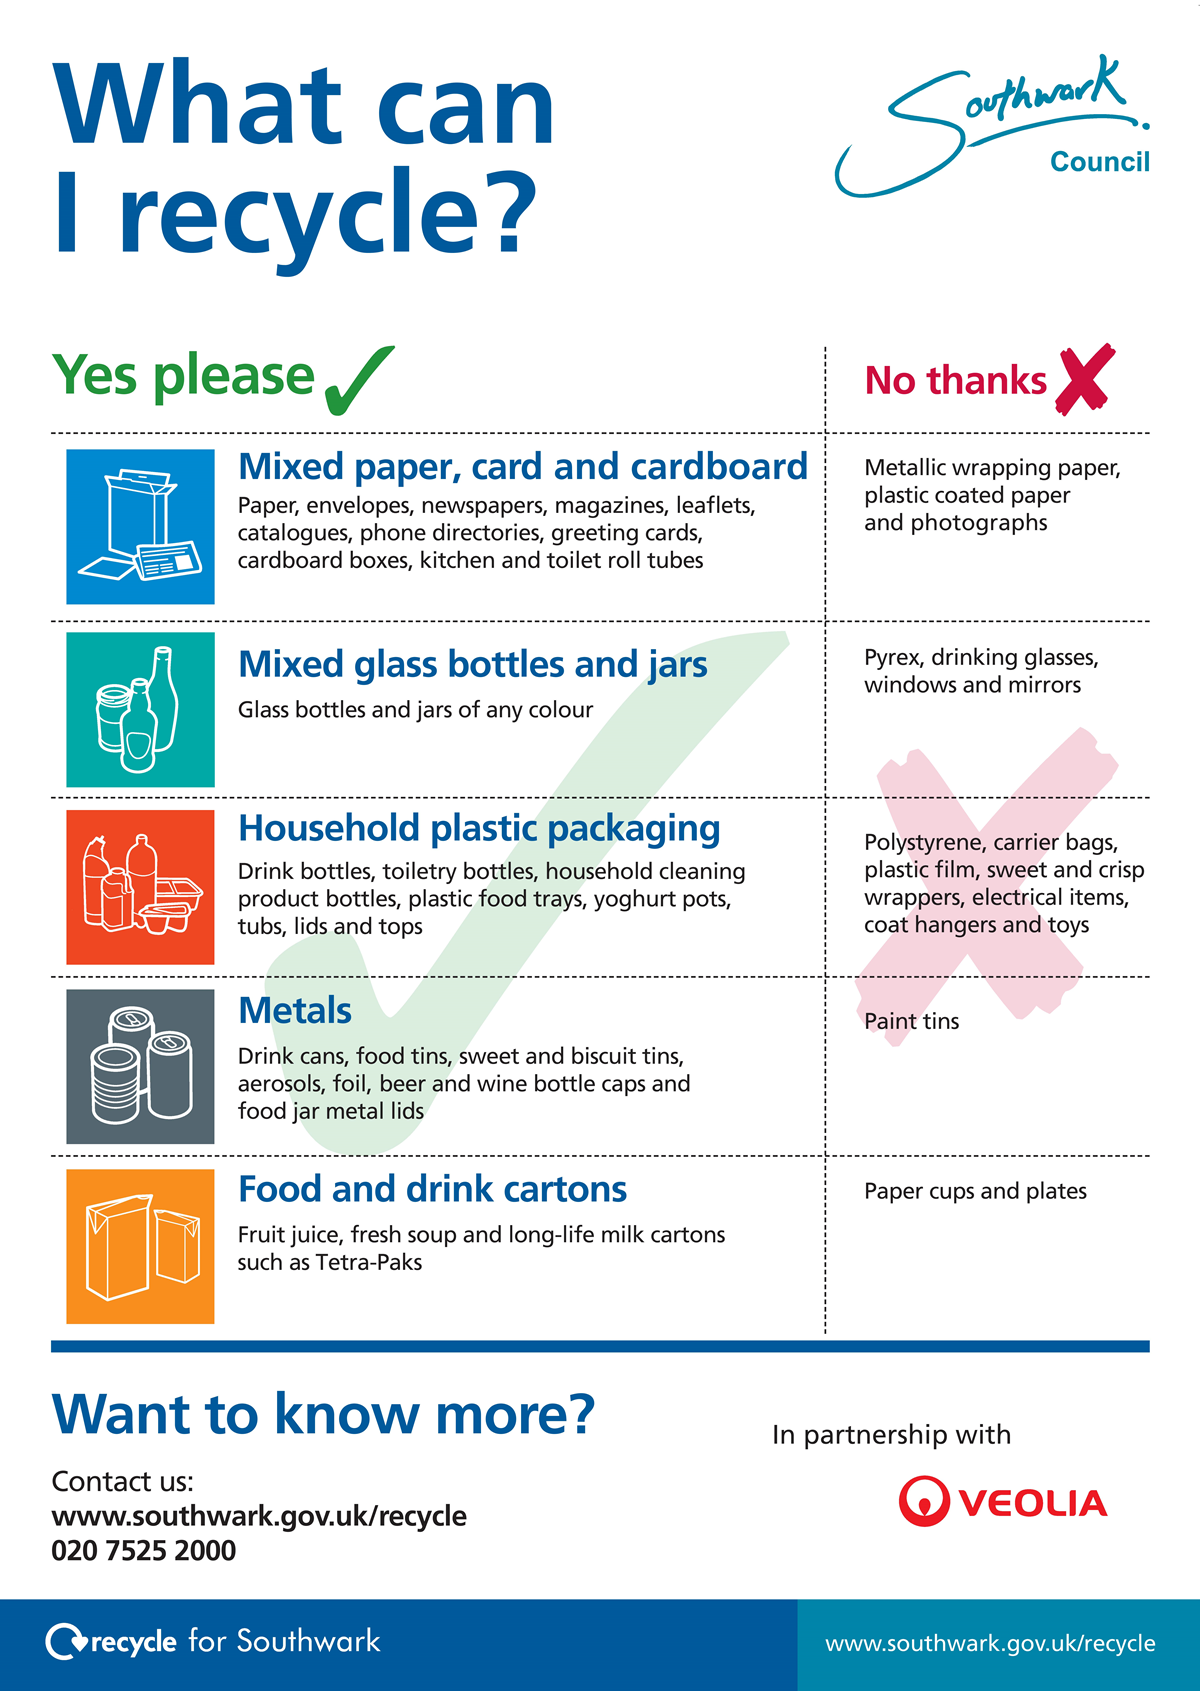 Poster on what can be recycled. Please refer to below table for full information.